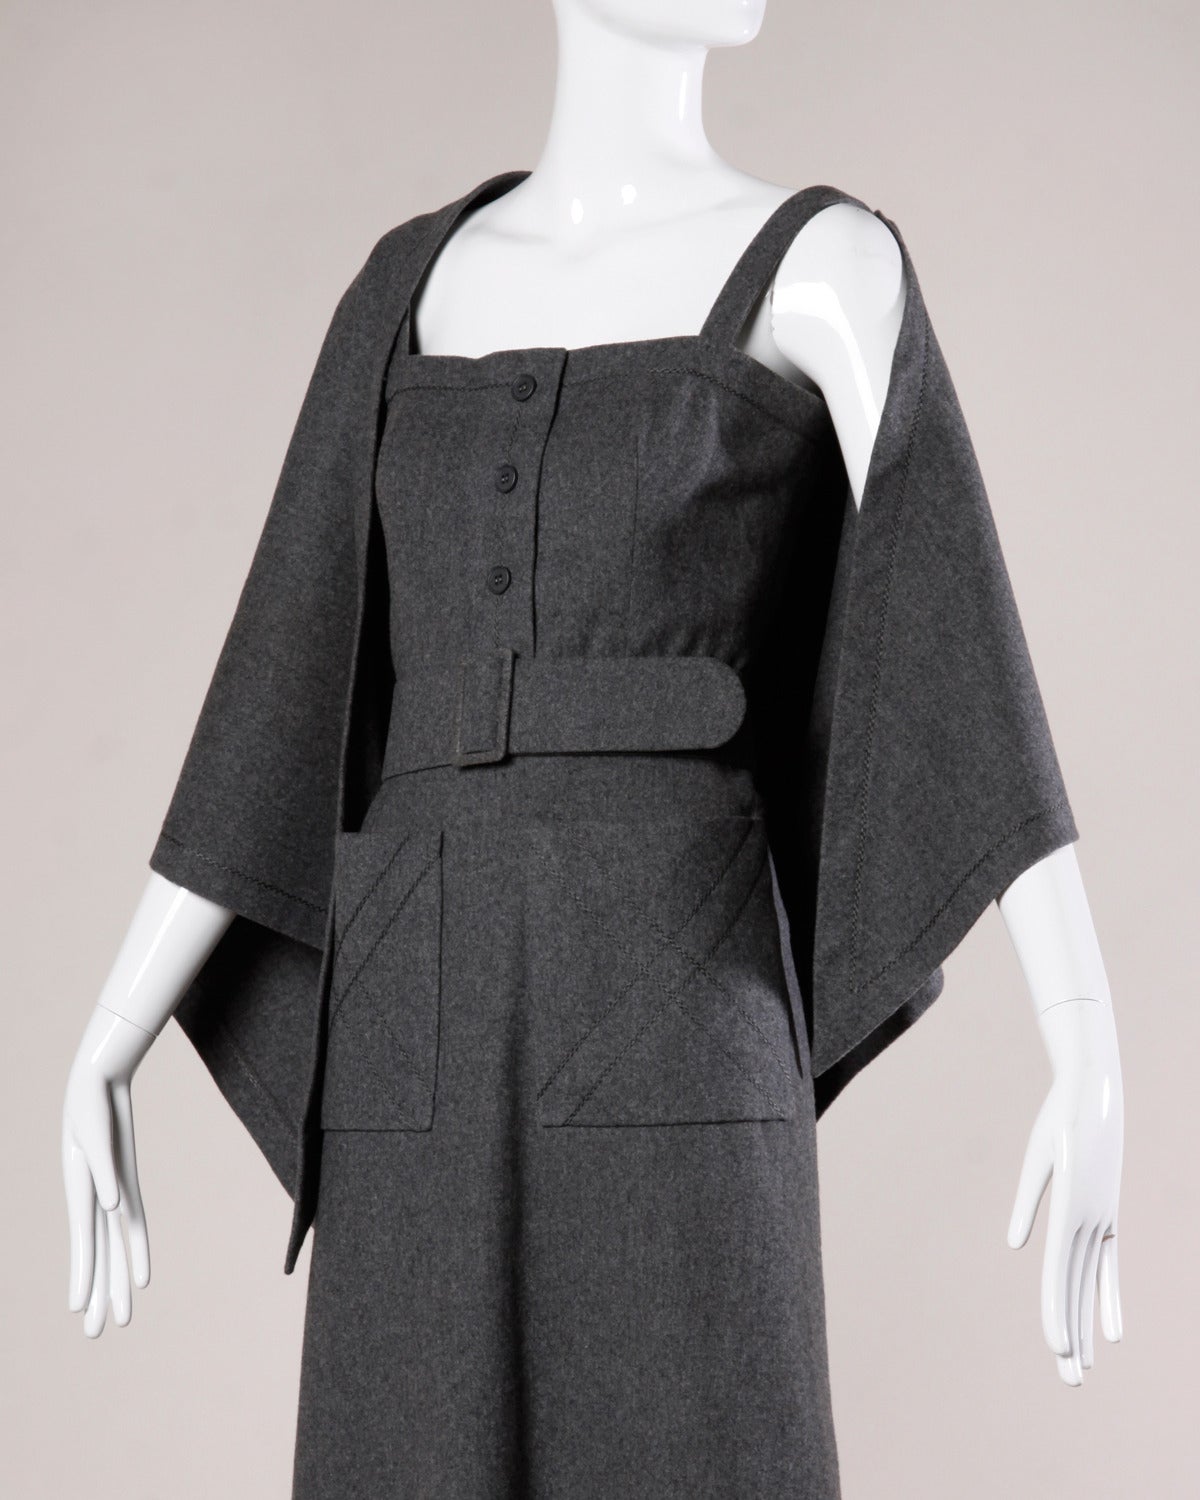 Stunning Jean Patou ensemble in luxurious medium weight gray wool featuring a sleeveless maxi dress, matching belt and matching wrap. Gorgeous quality and construction. All pieces can be worn together as ensemble or separately. 

Details:

Fully